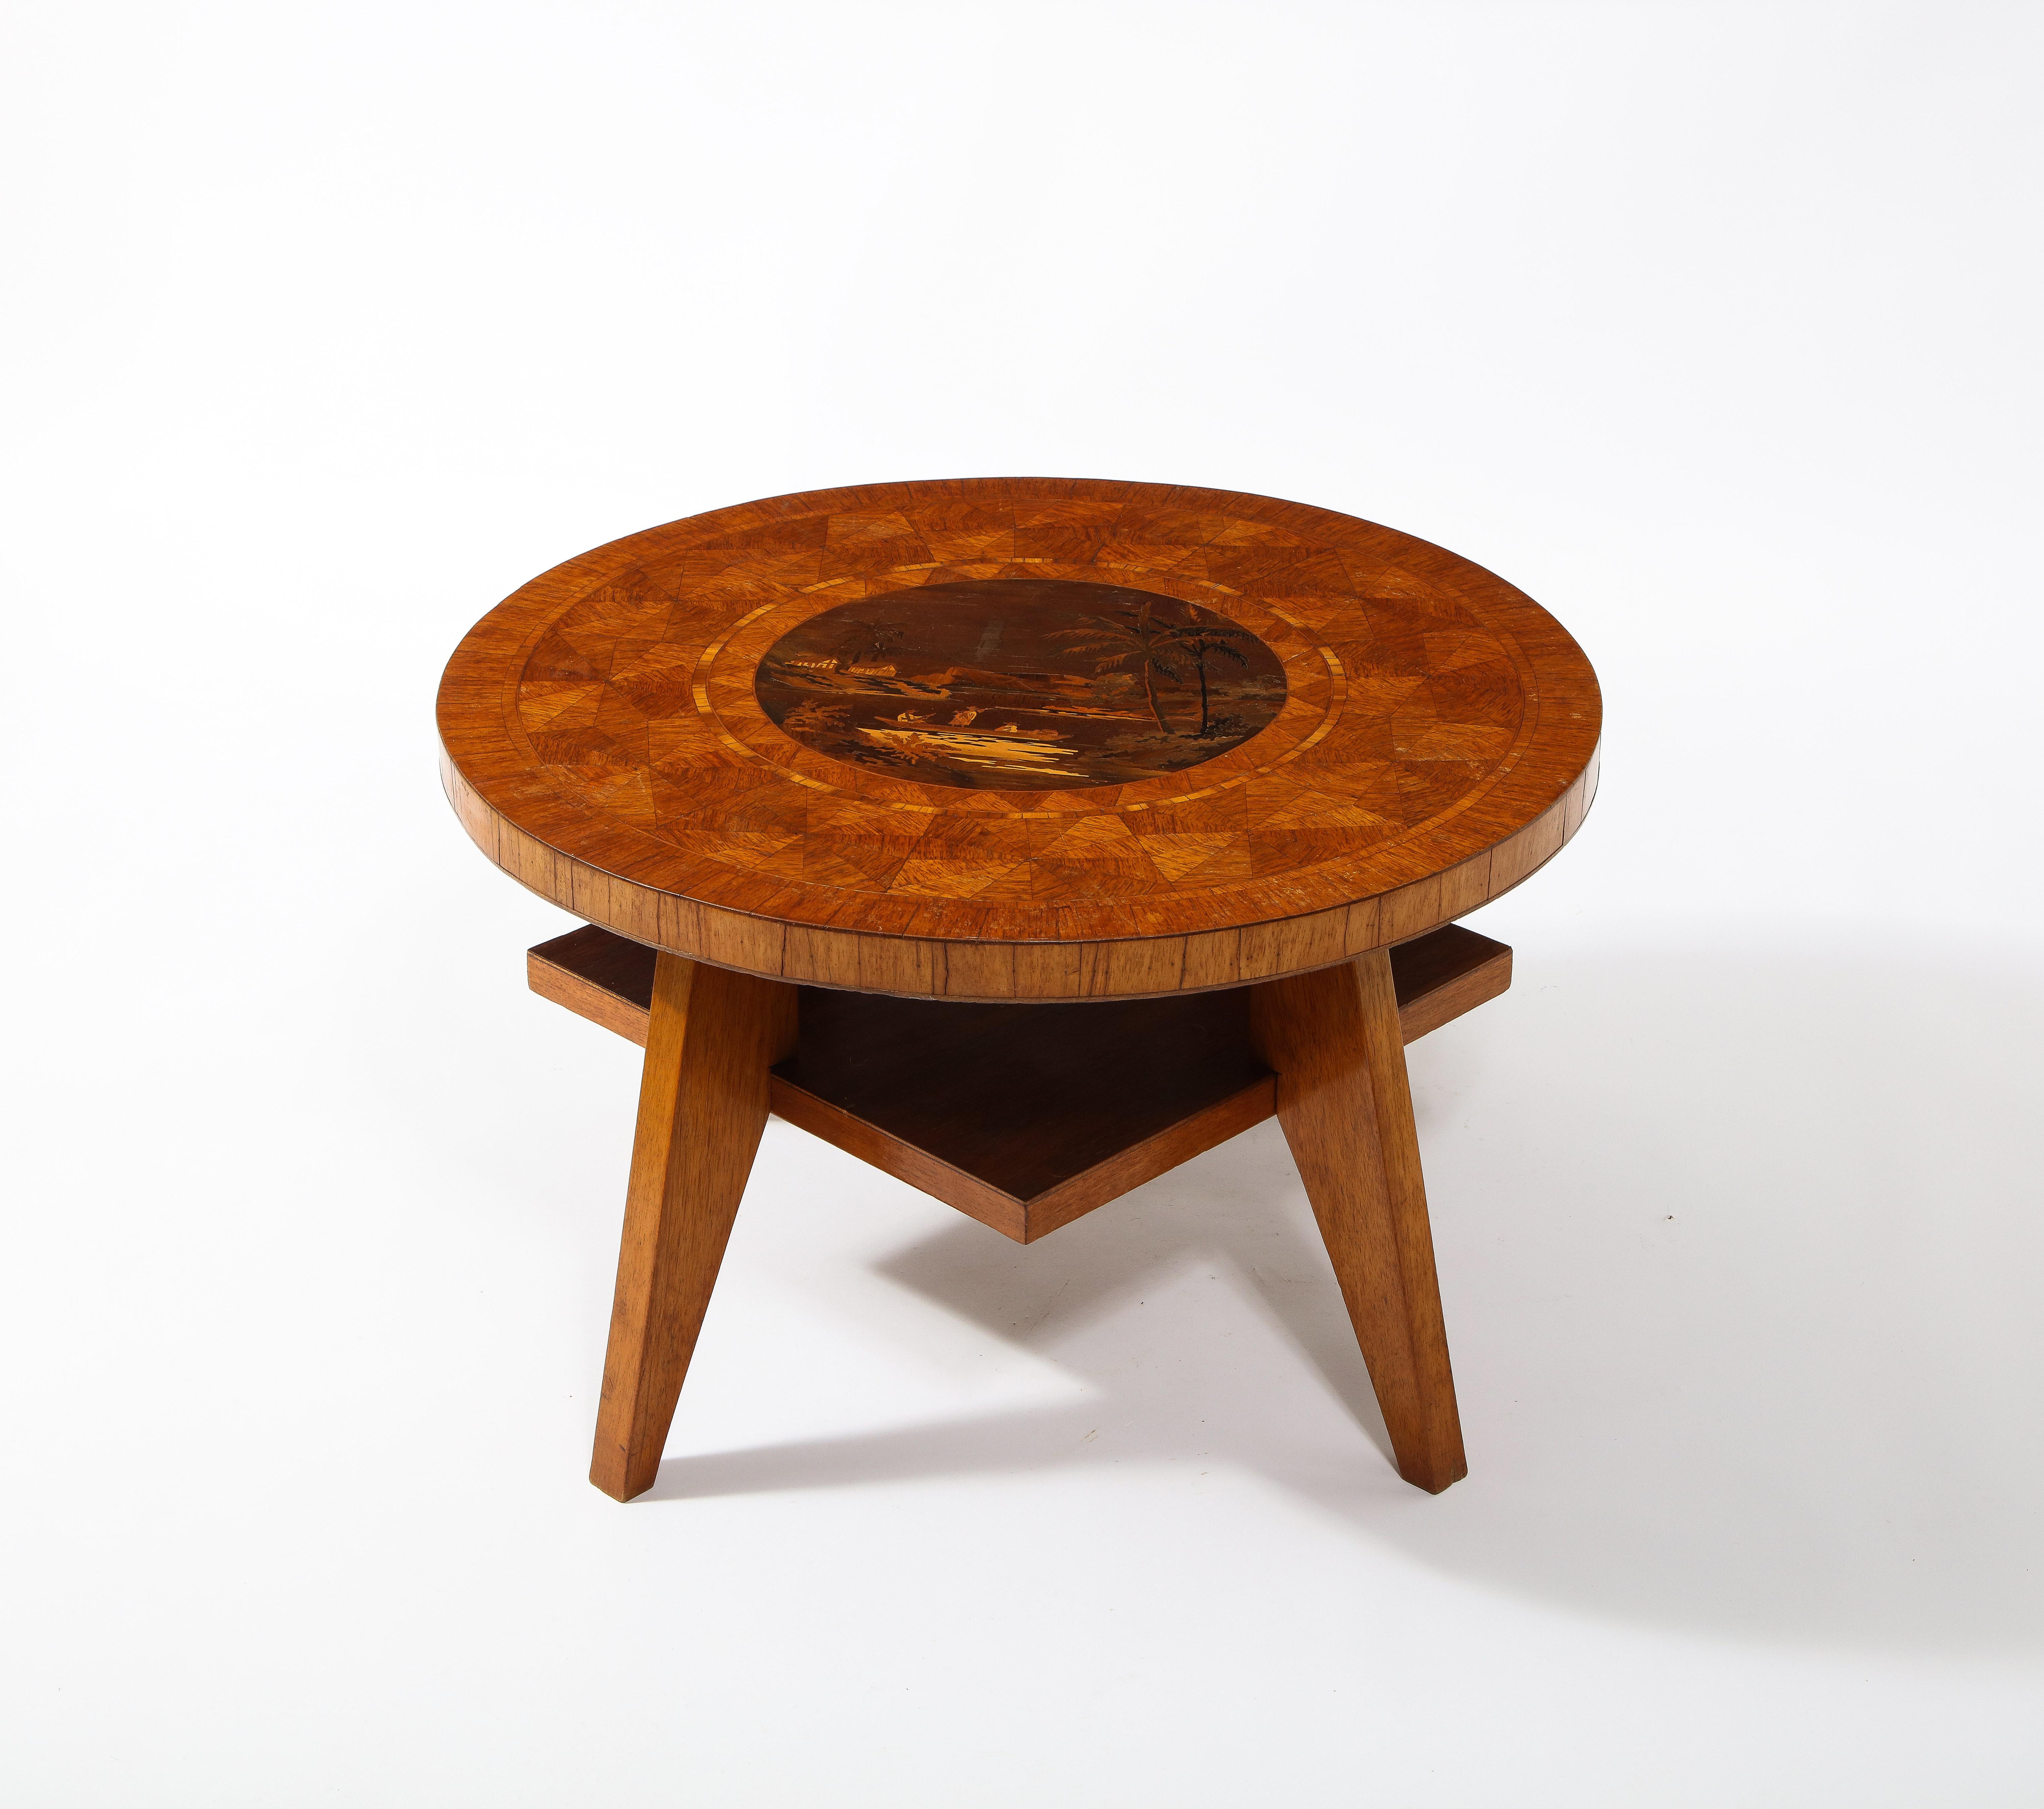 A Swedish inlaid table, very minimal construction on 4 legs, the square lower-tier and sturdy legs contrasted by a round top delicately inlaid with a tropical decor.